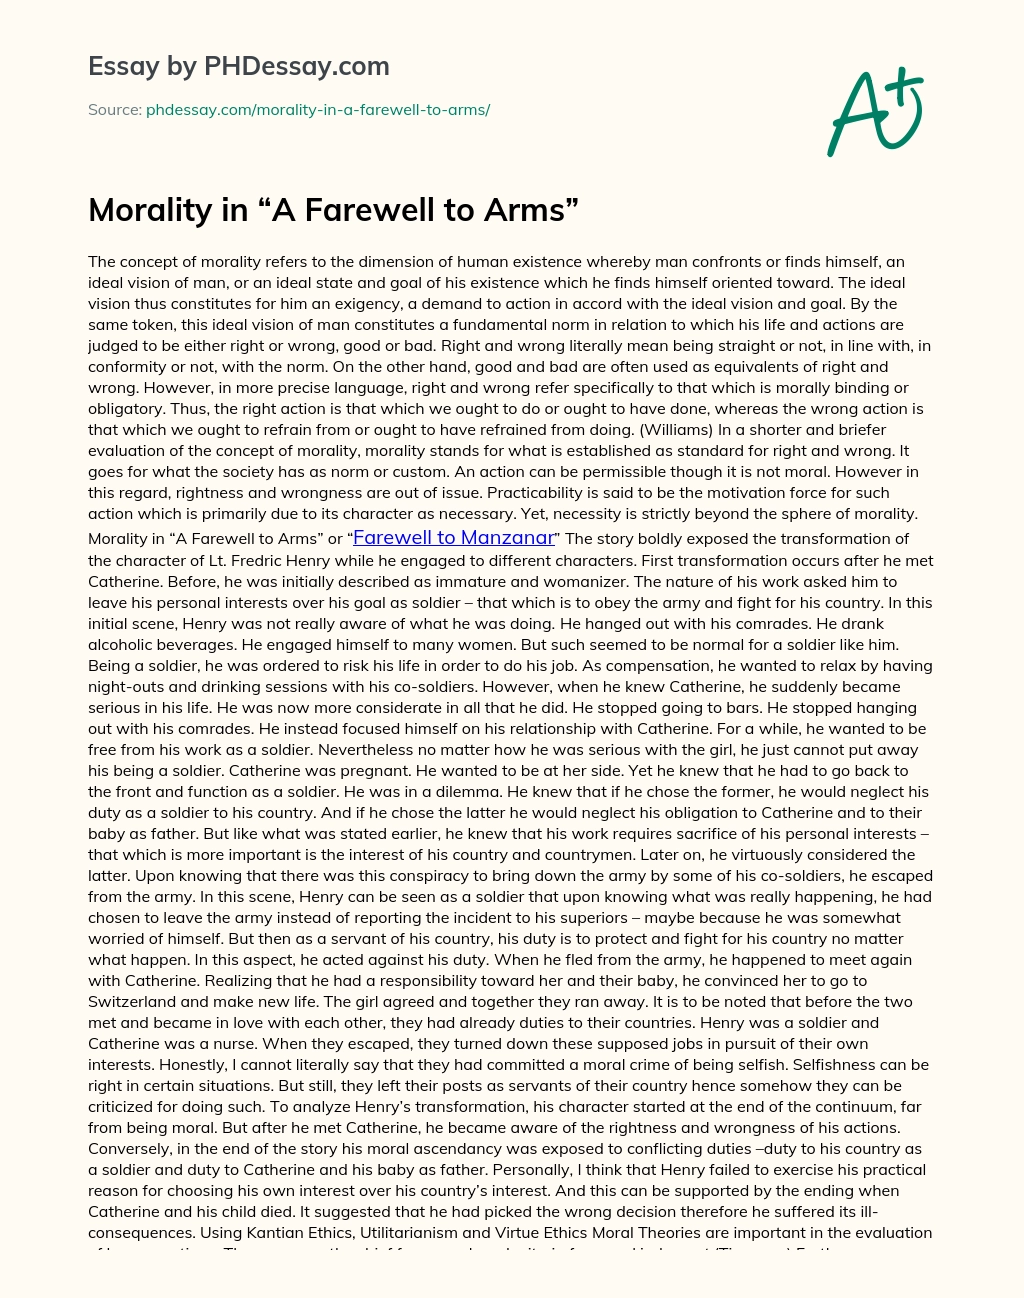 Morality in “A Farewell to Arms” essay